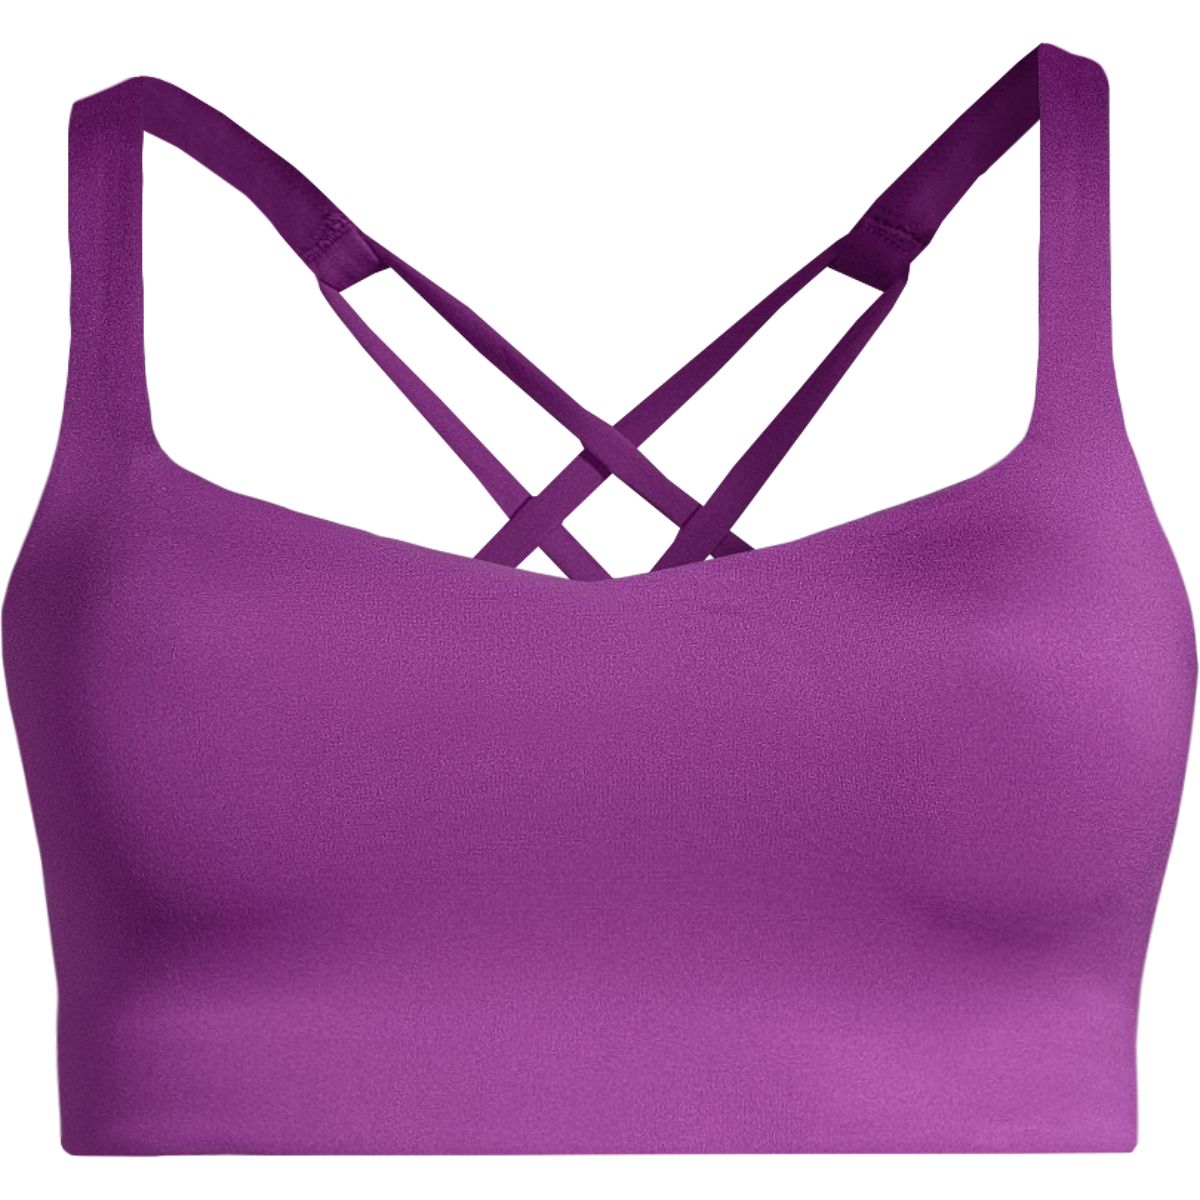 https://media-www.sportchek.ca/product/div-03-softgoods/dpt-70-athletic-clothing/sdpt-02-womens/334214620/gf-collective-w-float-riley-sweetheart-bra-53175022-fdc0-4c4d-9c5f-953b1b746261-jpgrendition.jpg?imdensity=1&imwidth=1244&impolicy=mZoom